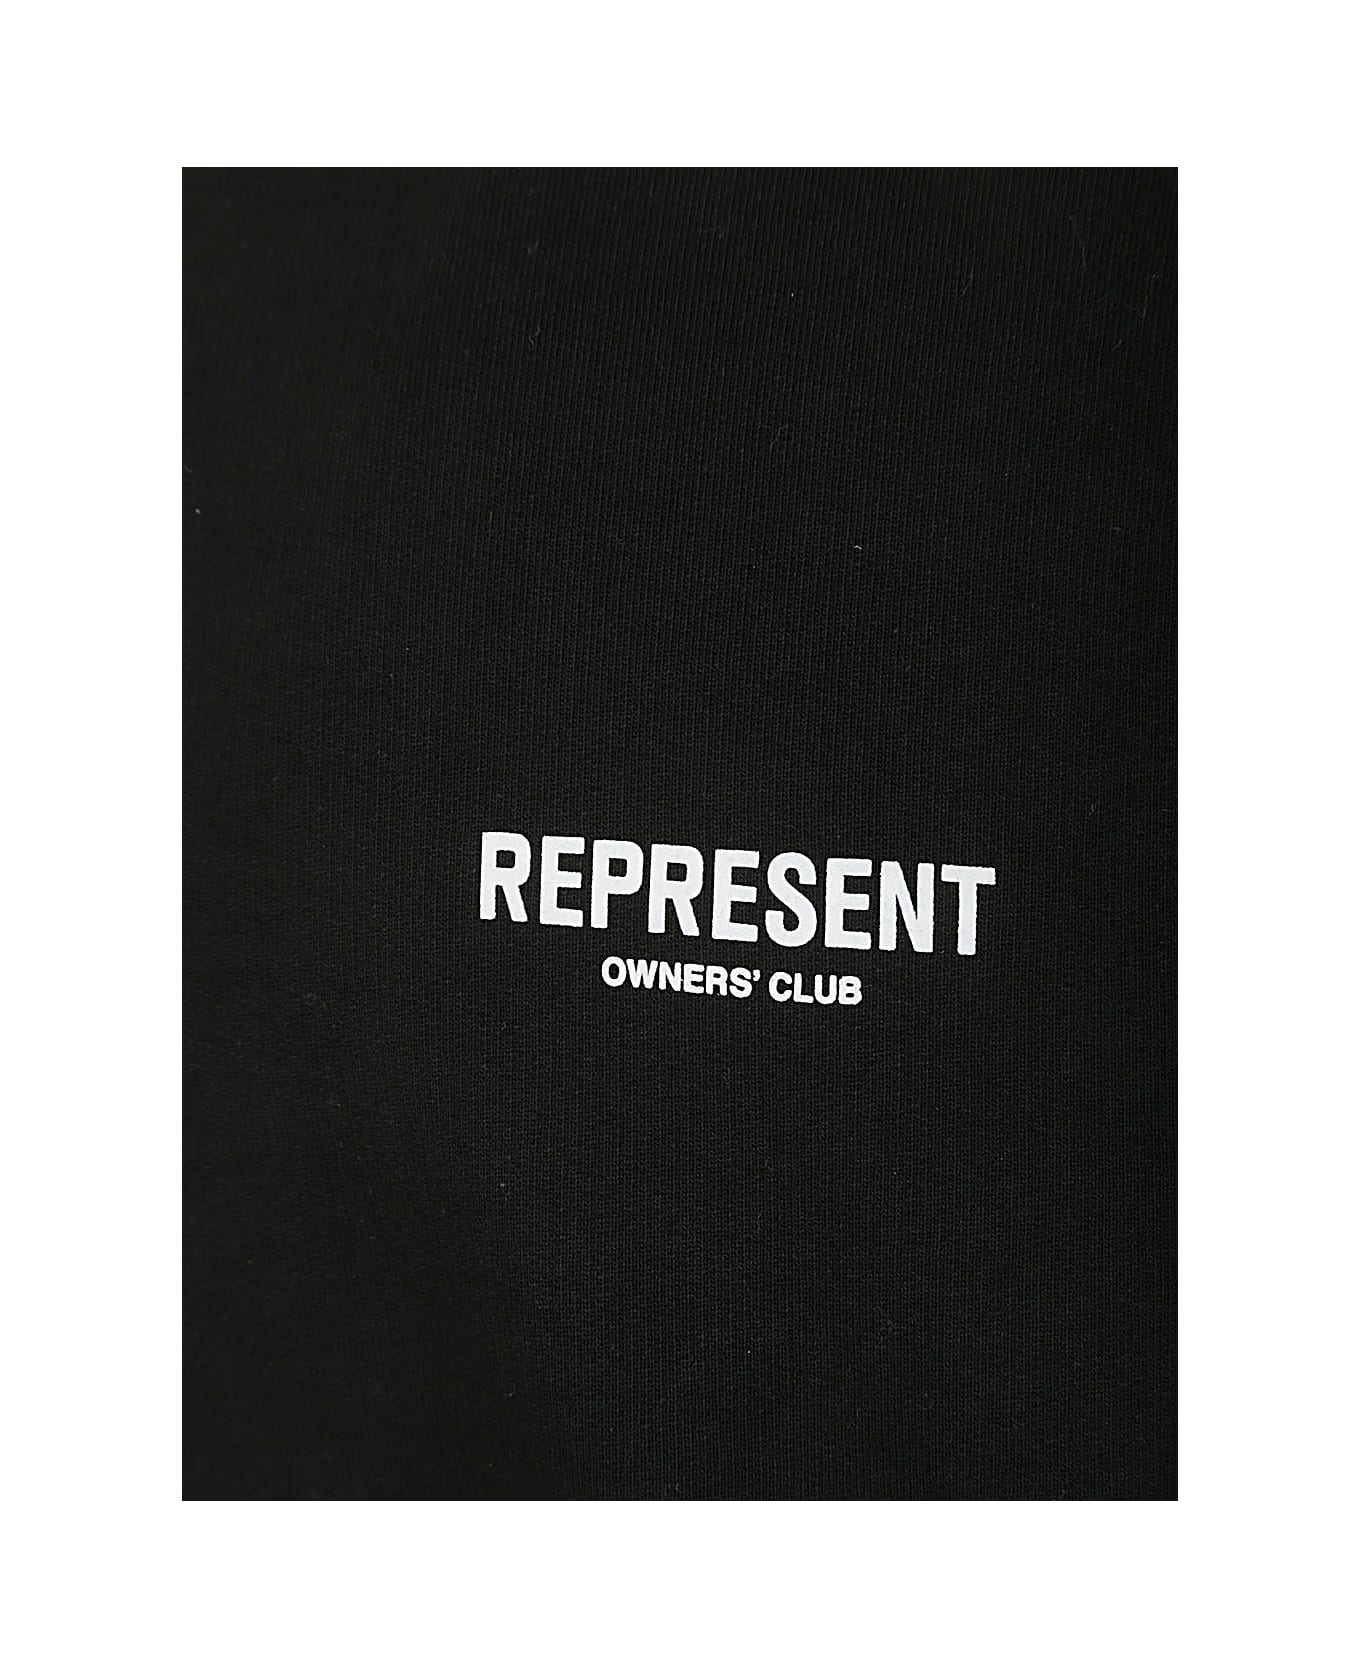 REPRESENT Owners Club Sweater - Black